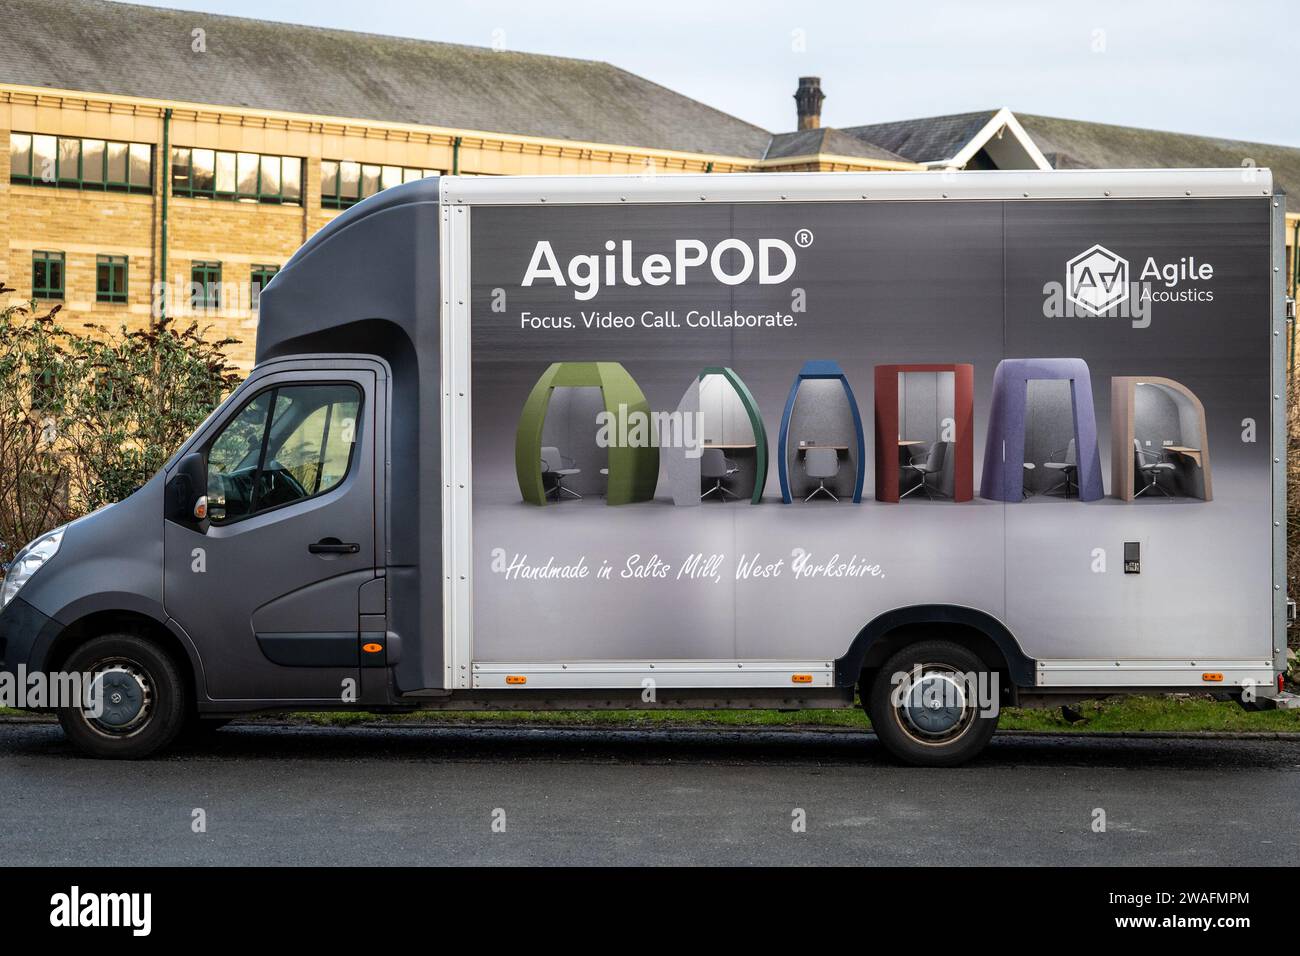 AgilePOD acoustic office space pods advertised on AgileAcoustics company van in Salts Mill Stock Photo